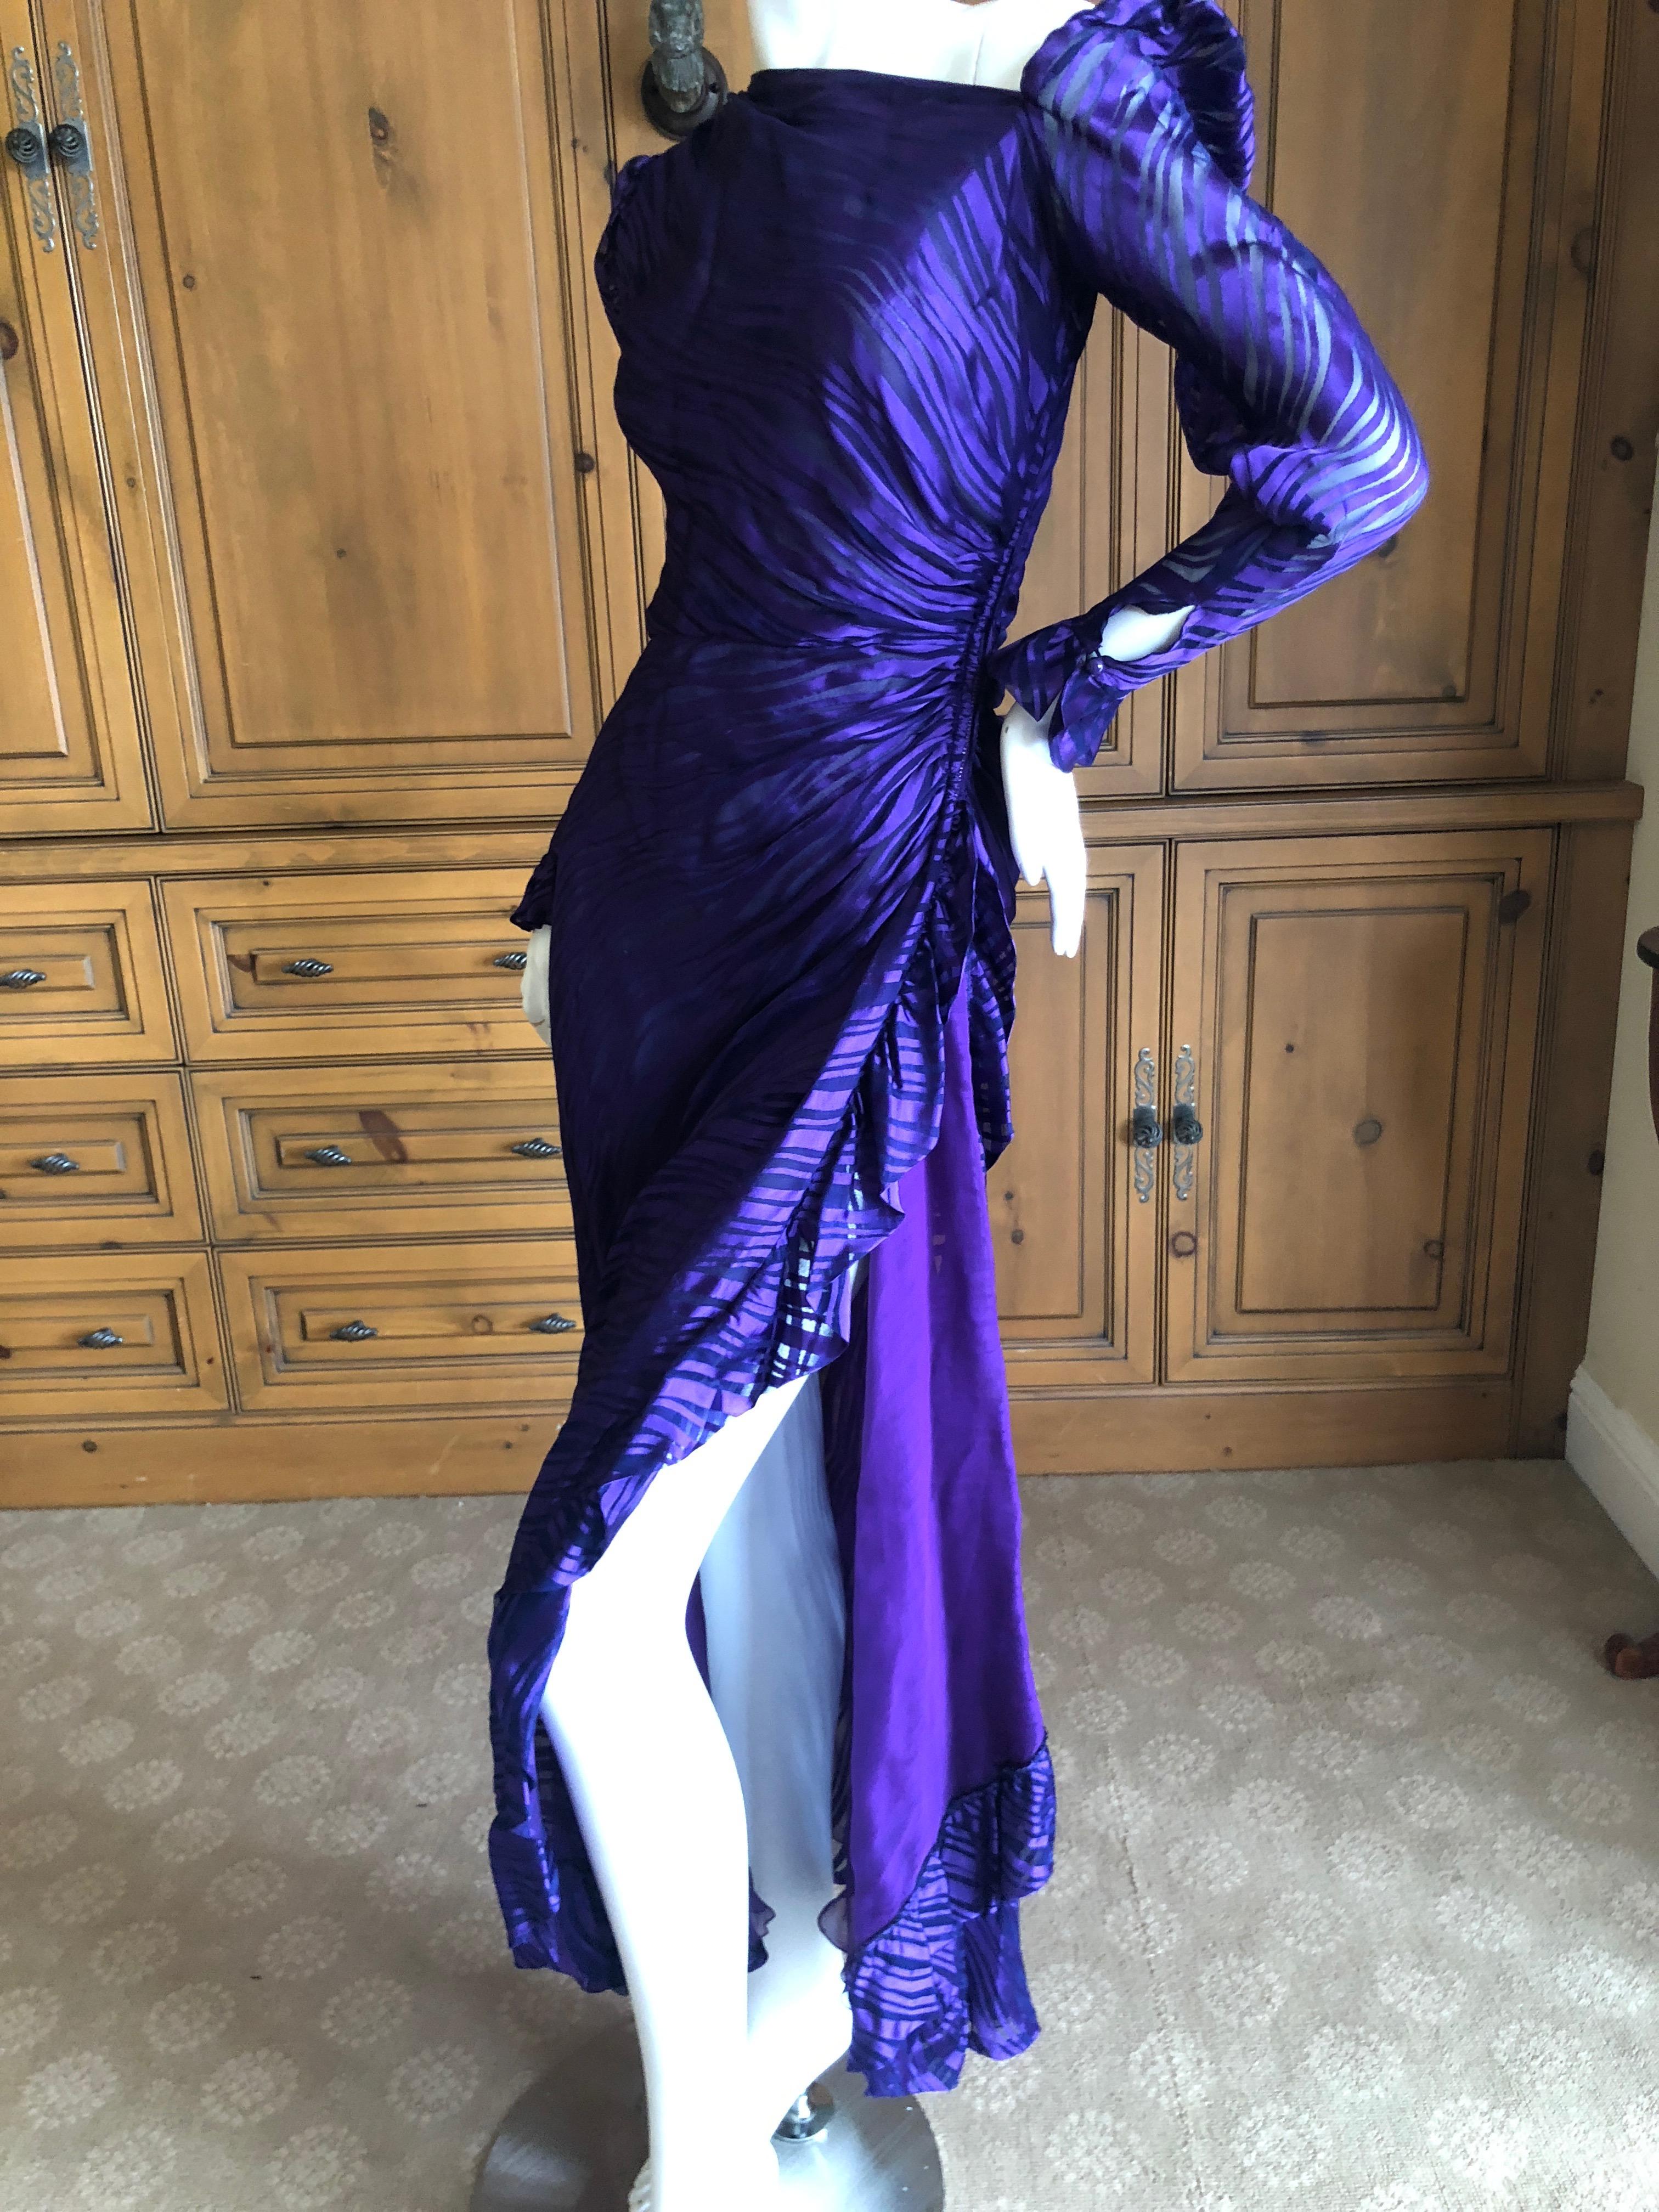 Yves Saint Laurent Rive Gauche 1976 Sheer Purple Silk One Shoulder Evening Dress 
So delightfully French. Sheer, but  just a peek of skin.
No size tag
Appx Size 38-40
Bust 40